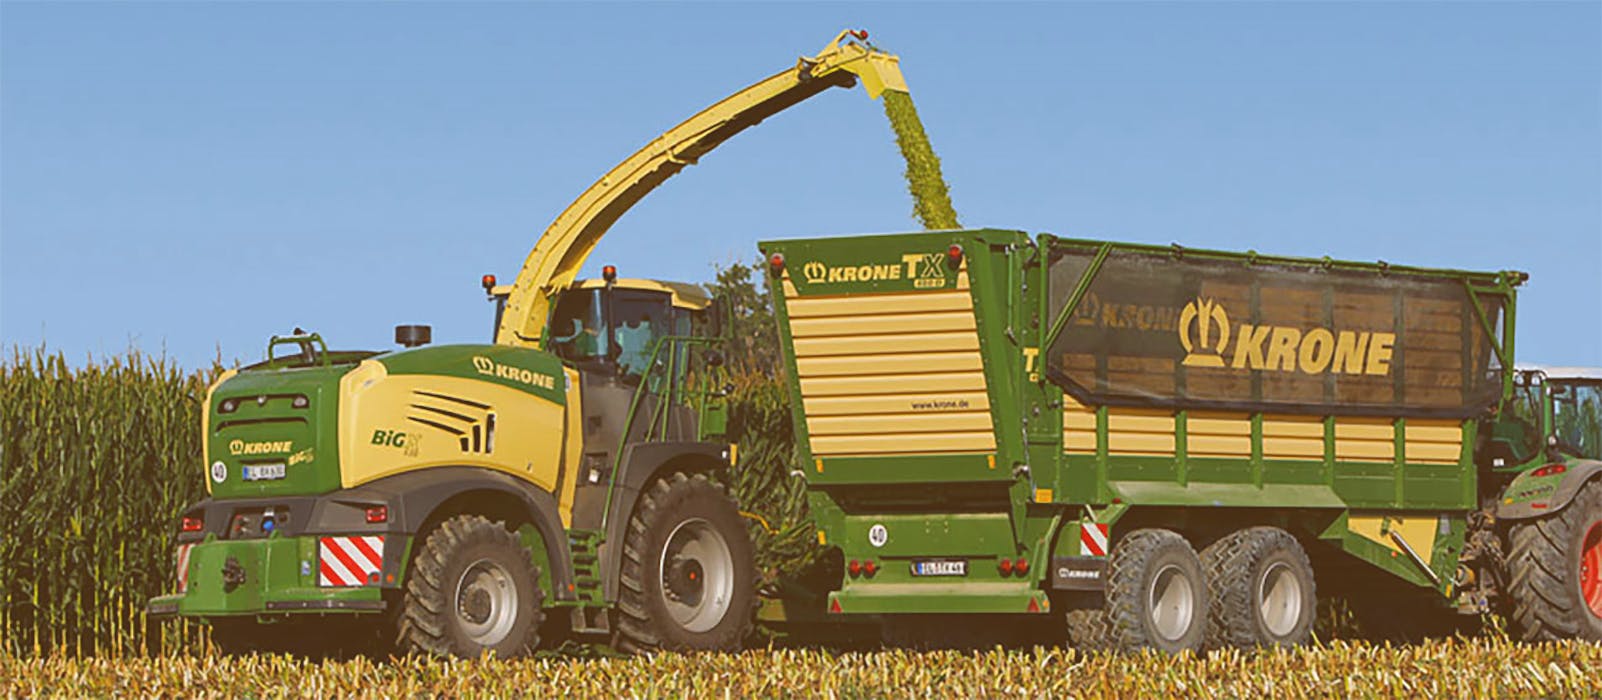 KRONE selects Pocketworks